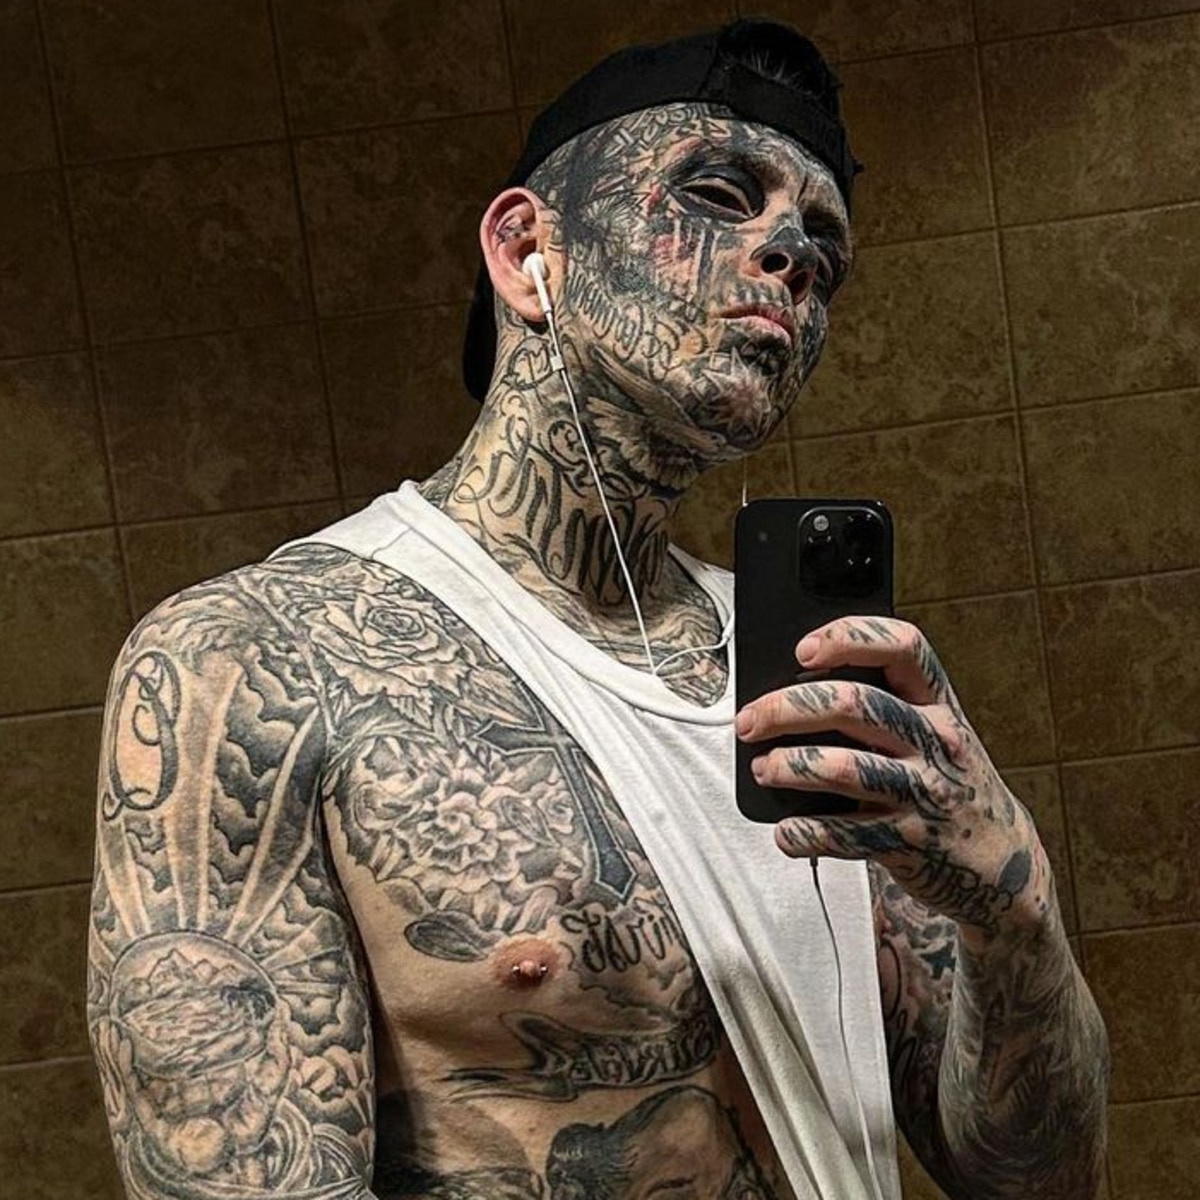 Bodybuilder goes to extremes to tattoo every body part